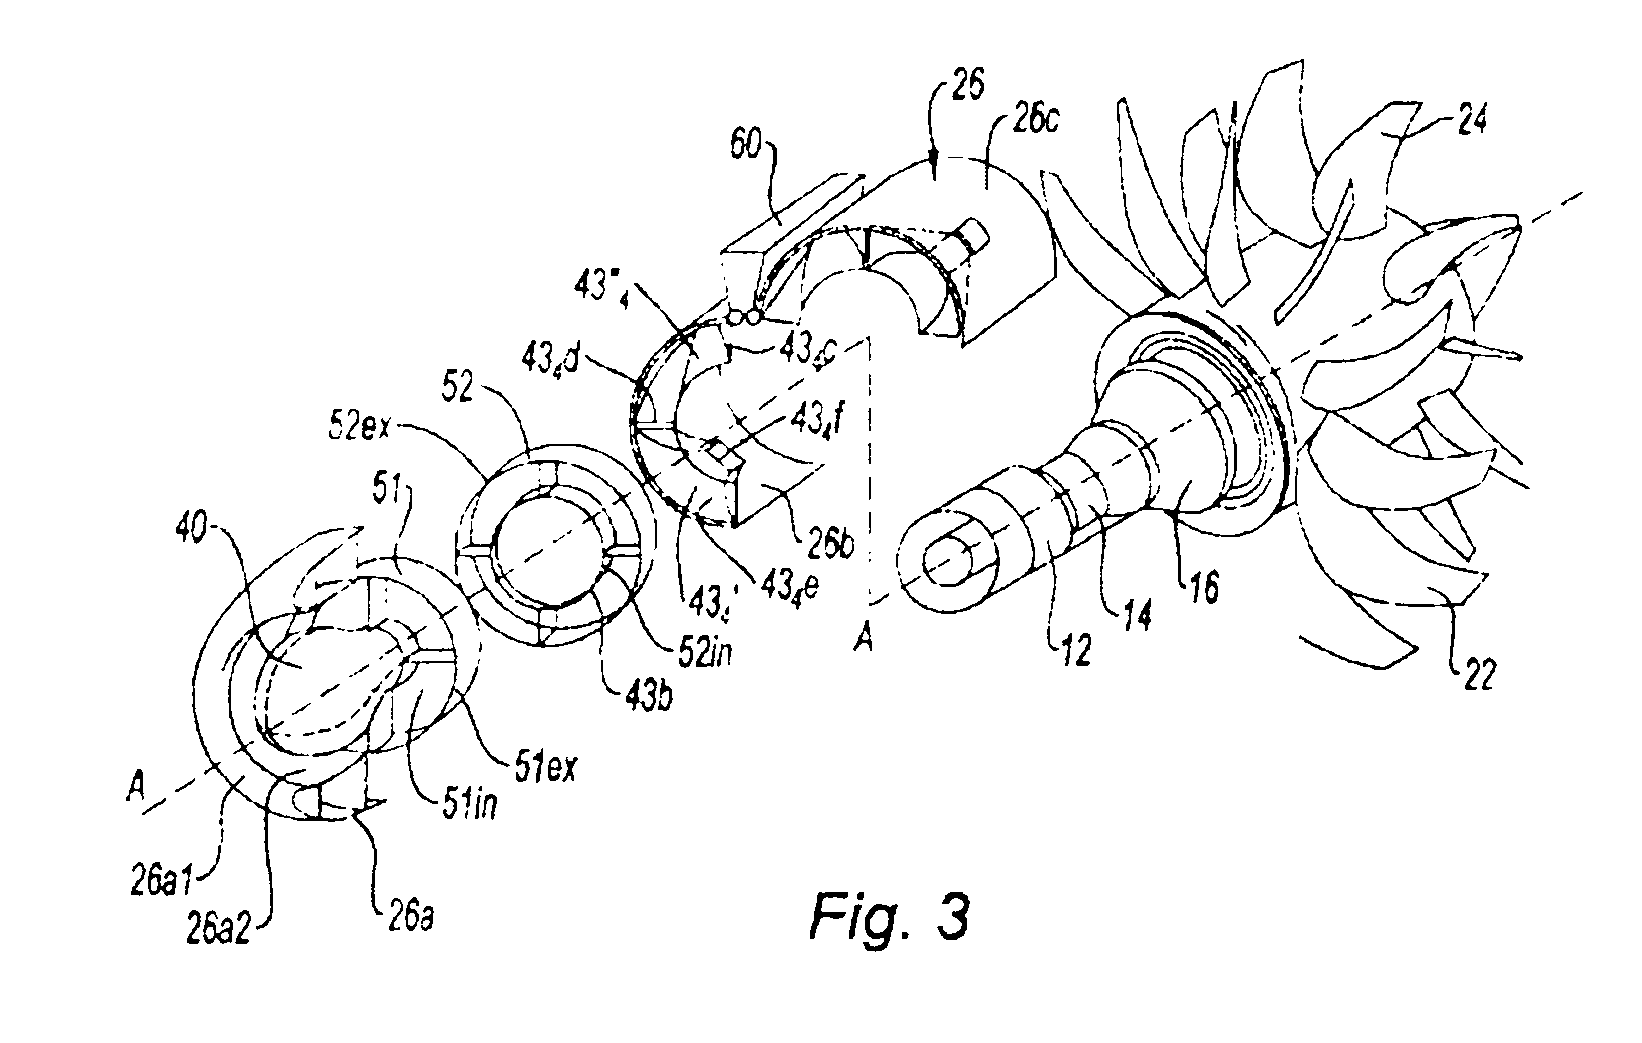 Gas turbine engine air intake in a nacelle